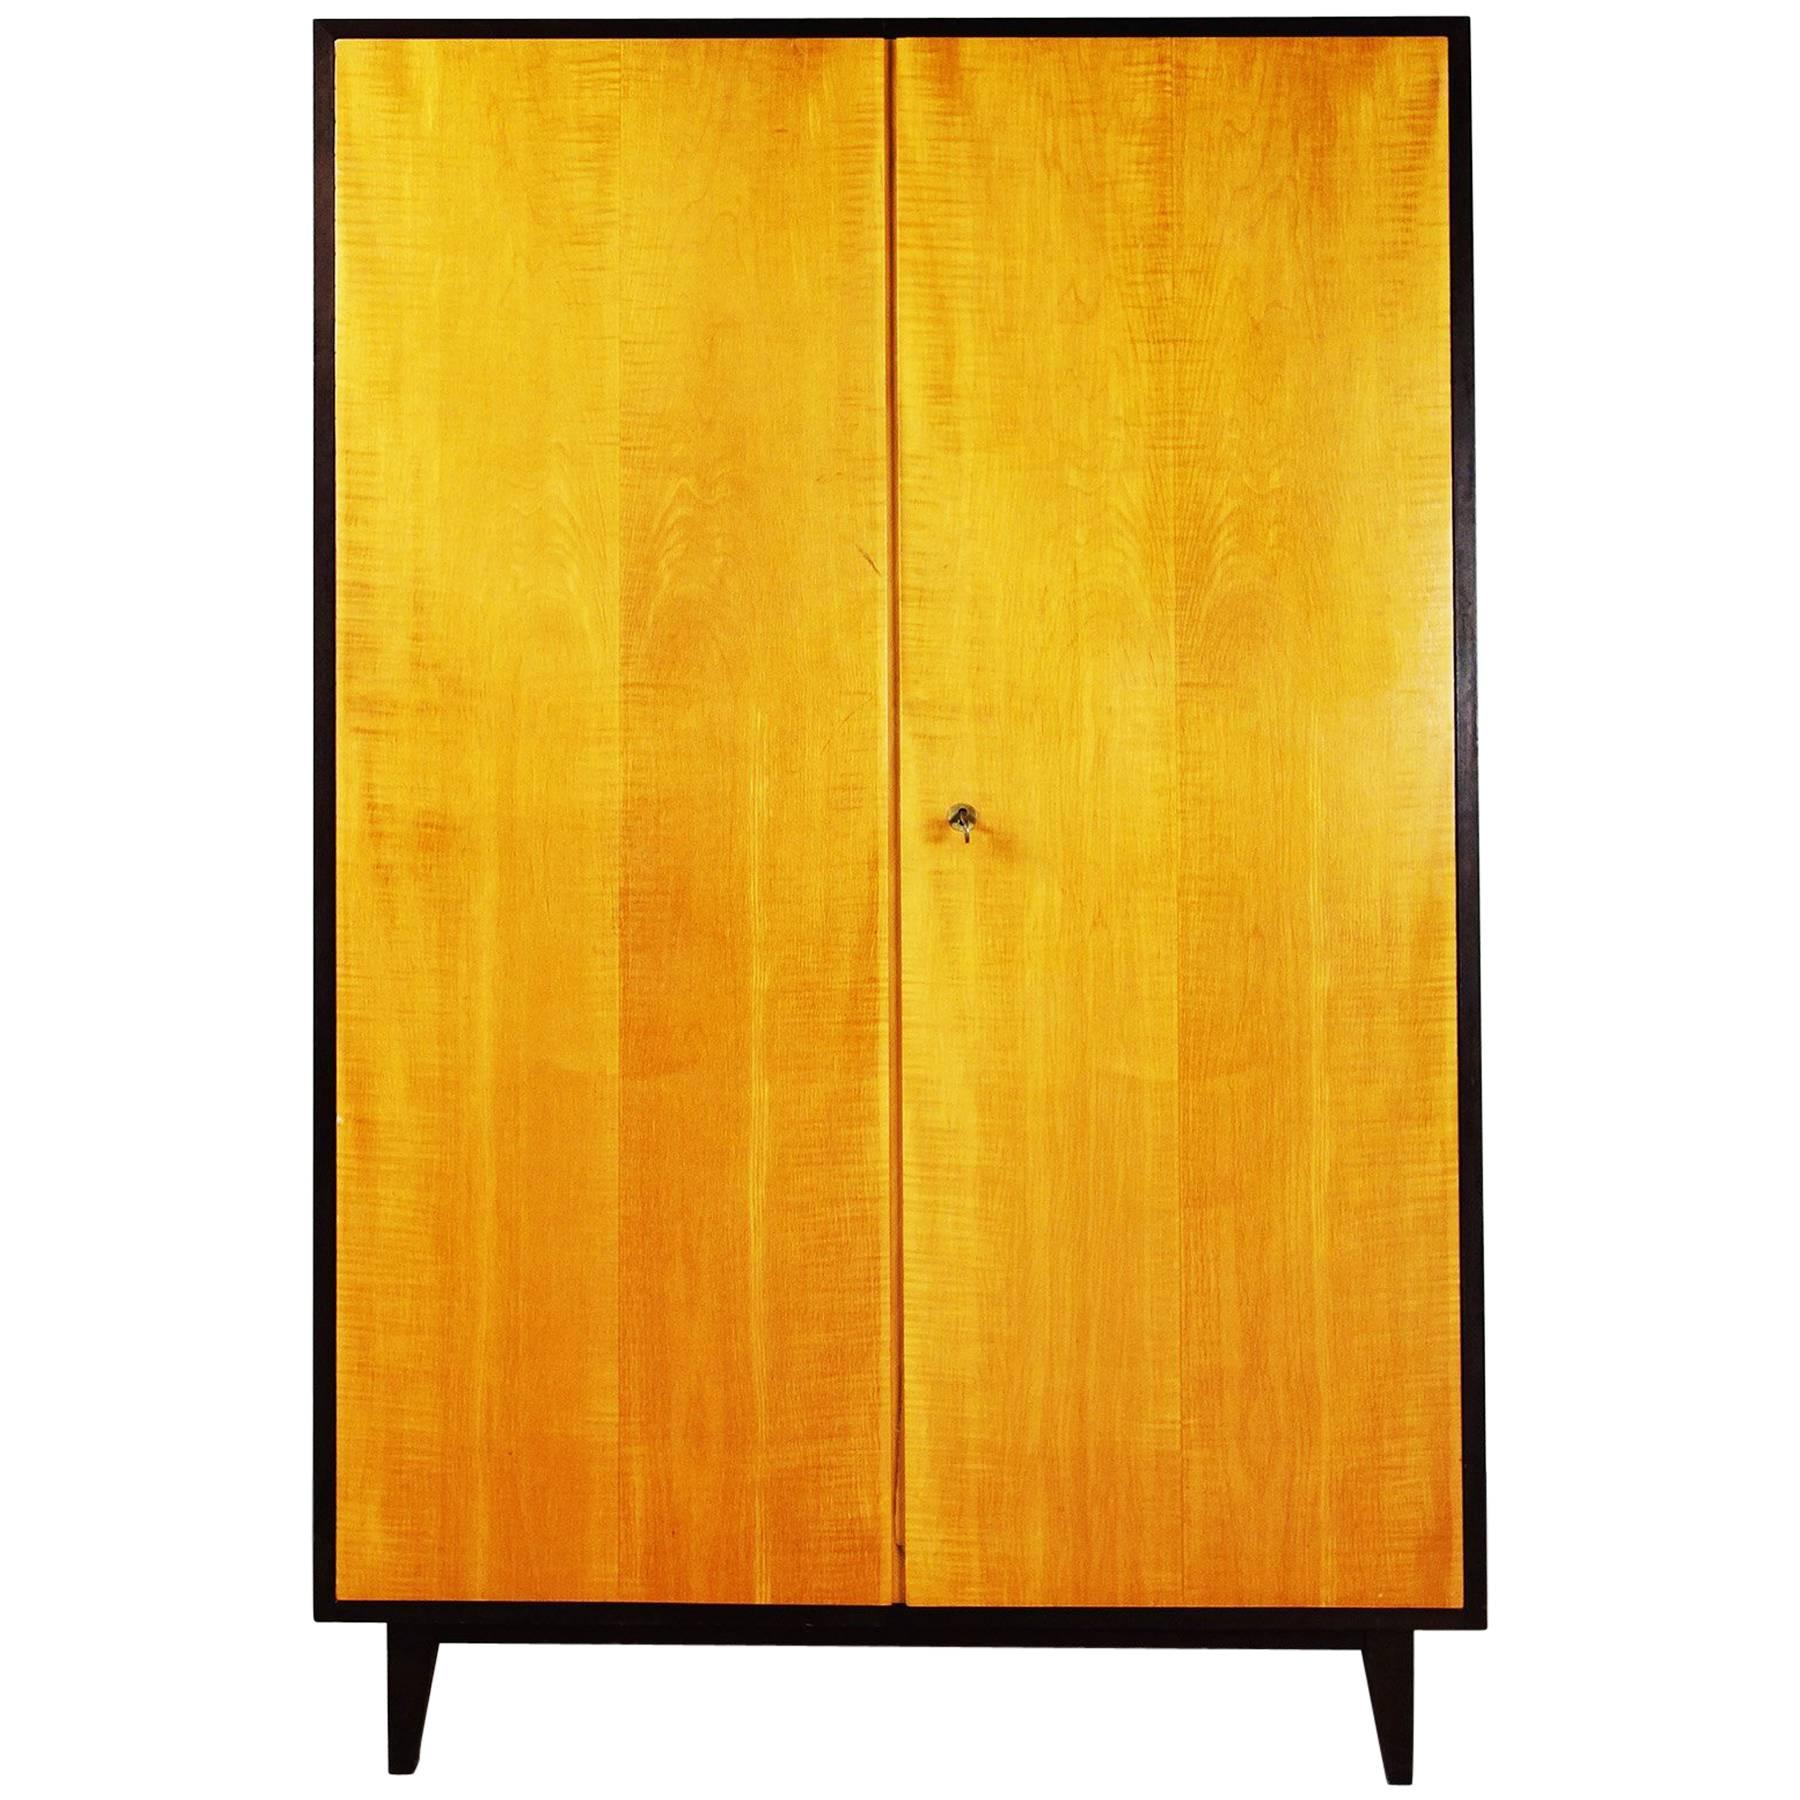 Modernist Wardrobe from the 1950s